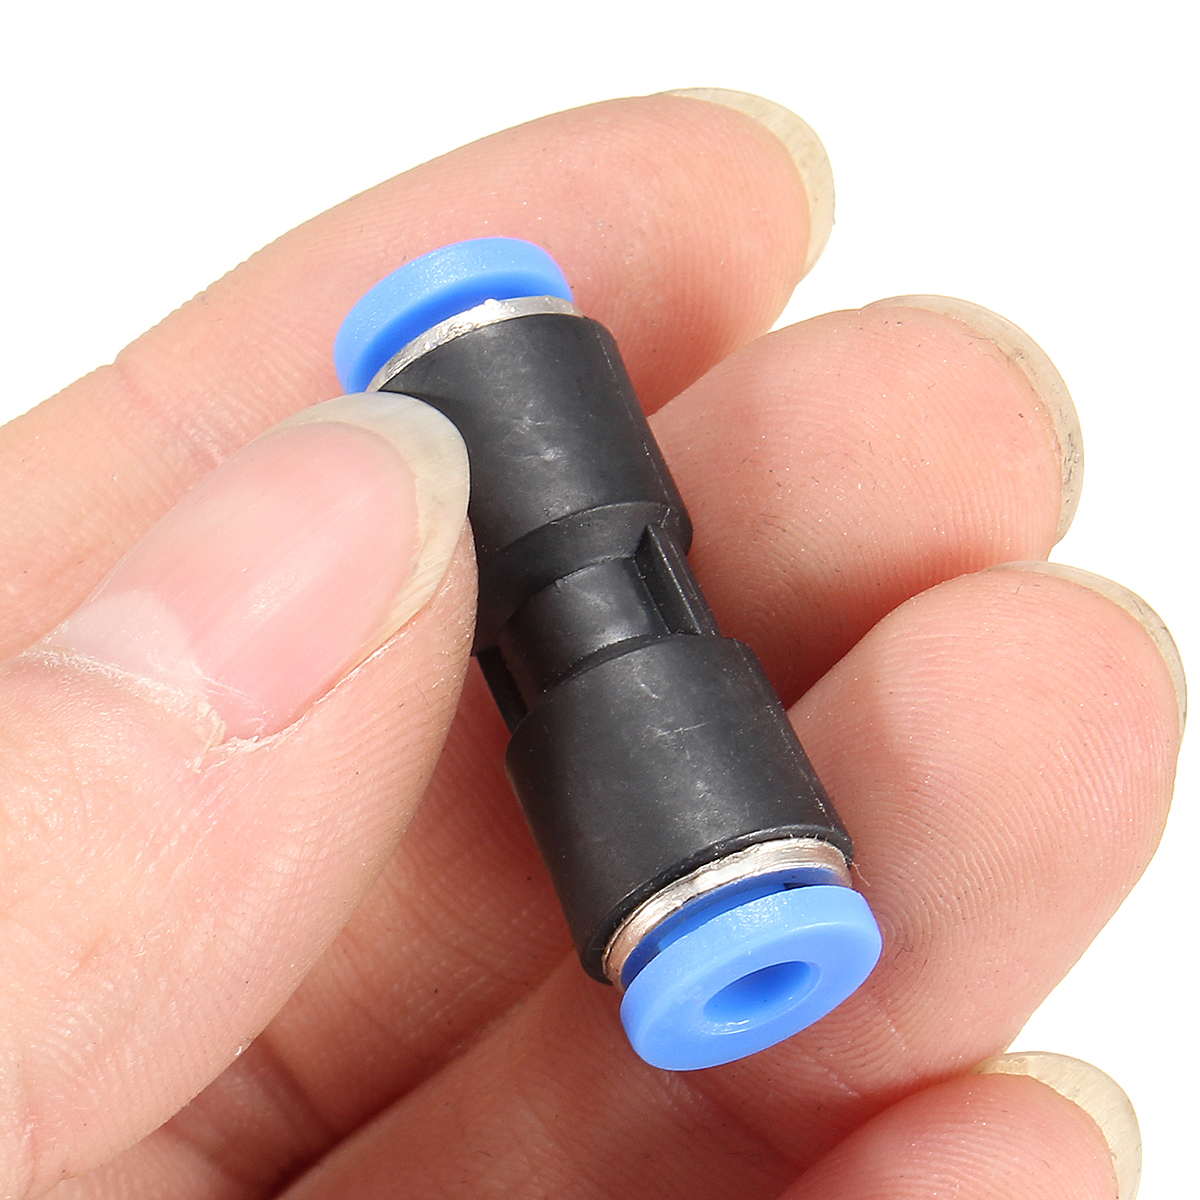 10Pcs Air Pneumatic OD 1/4 Inch Straight Union Push to Connect Fitting 4mm-12mm For Air Water Hose Plastic Pneumatic Parts